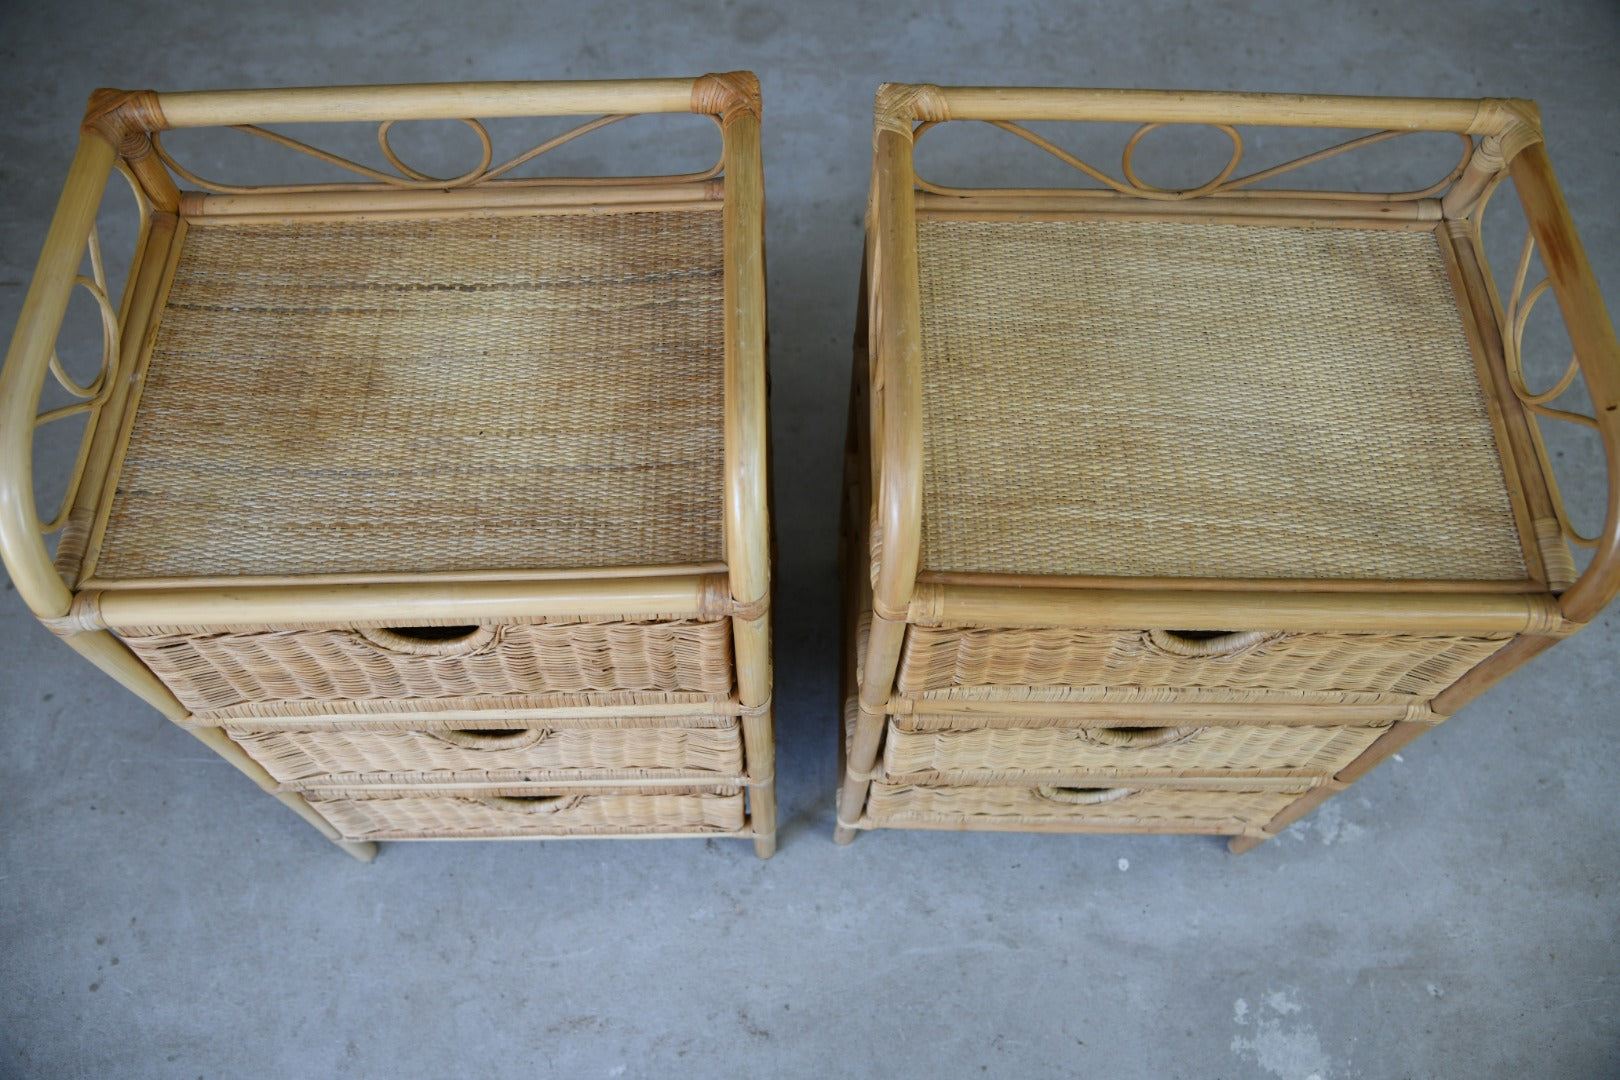 Late 20th Century Bamboo Bedside Tables